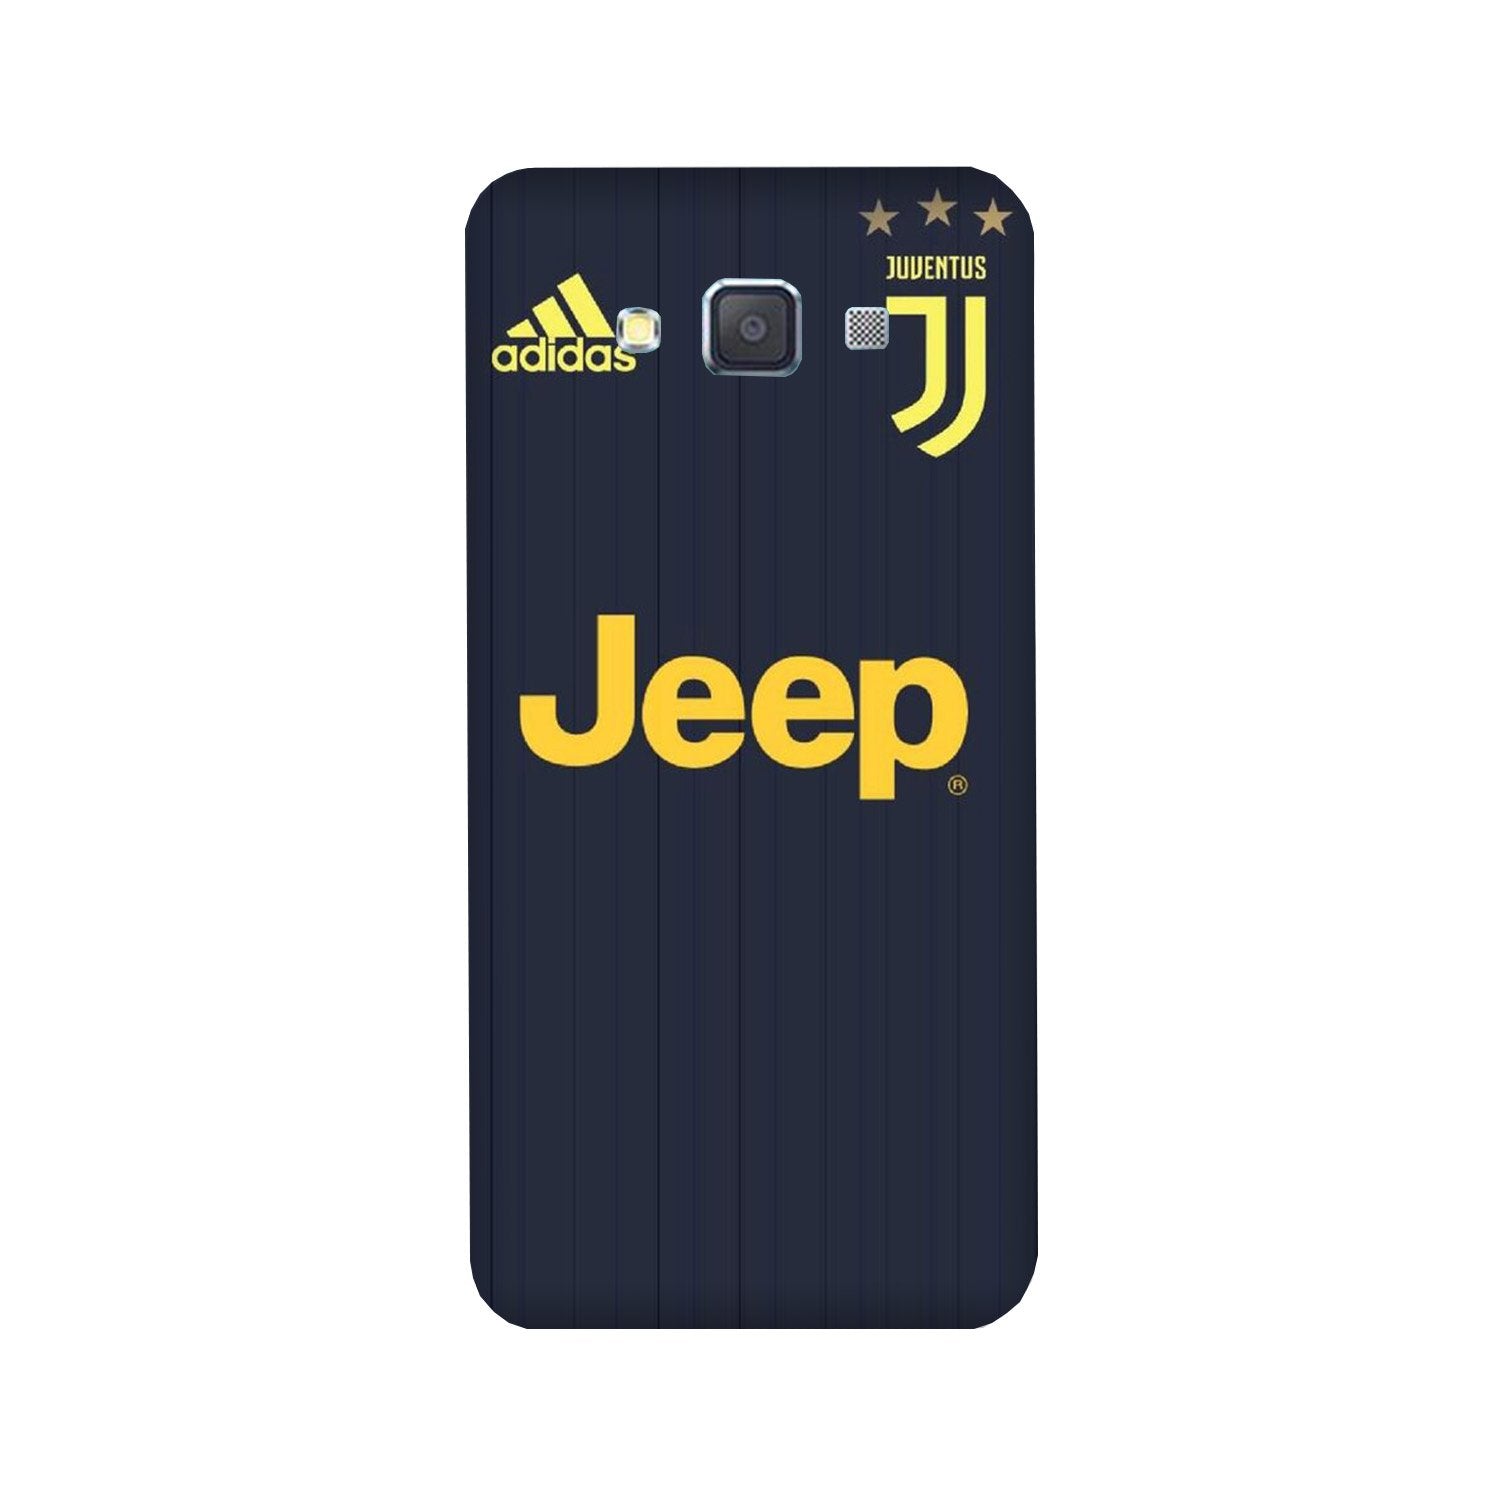 Jeep Juventus Case for Galaxy Grand Max(Design - 161)